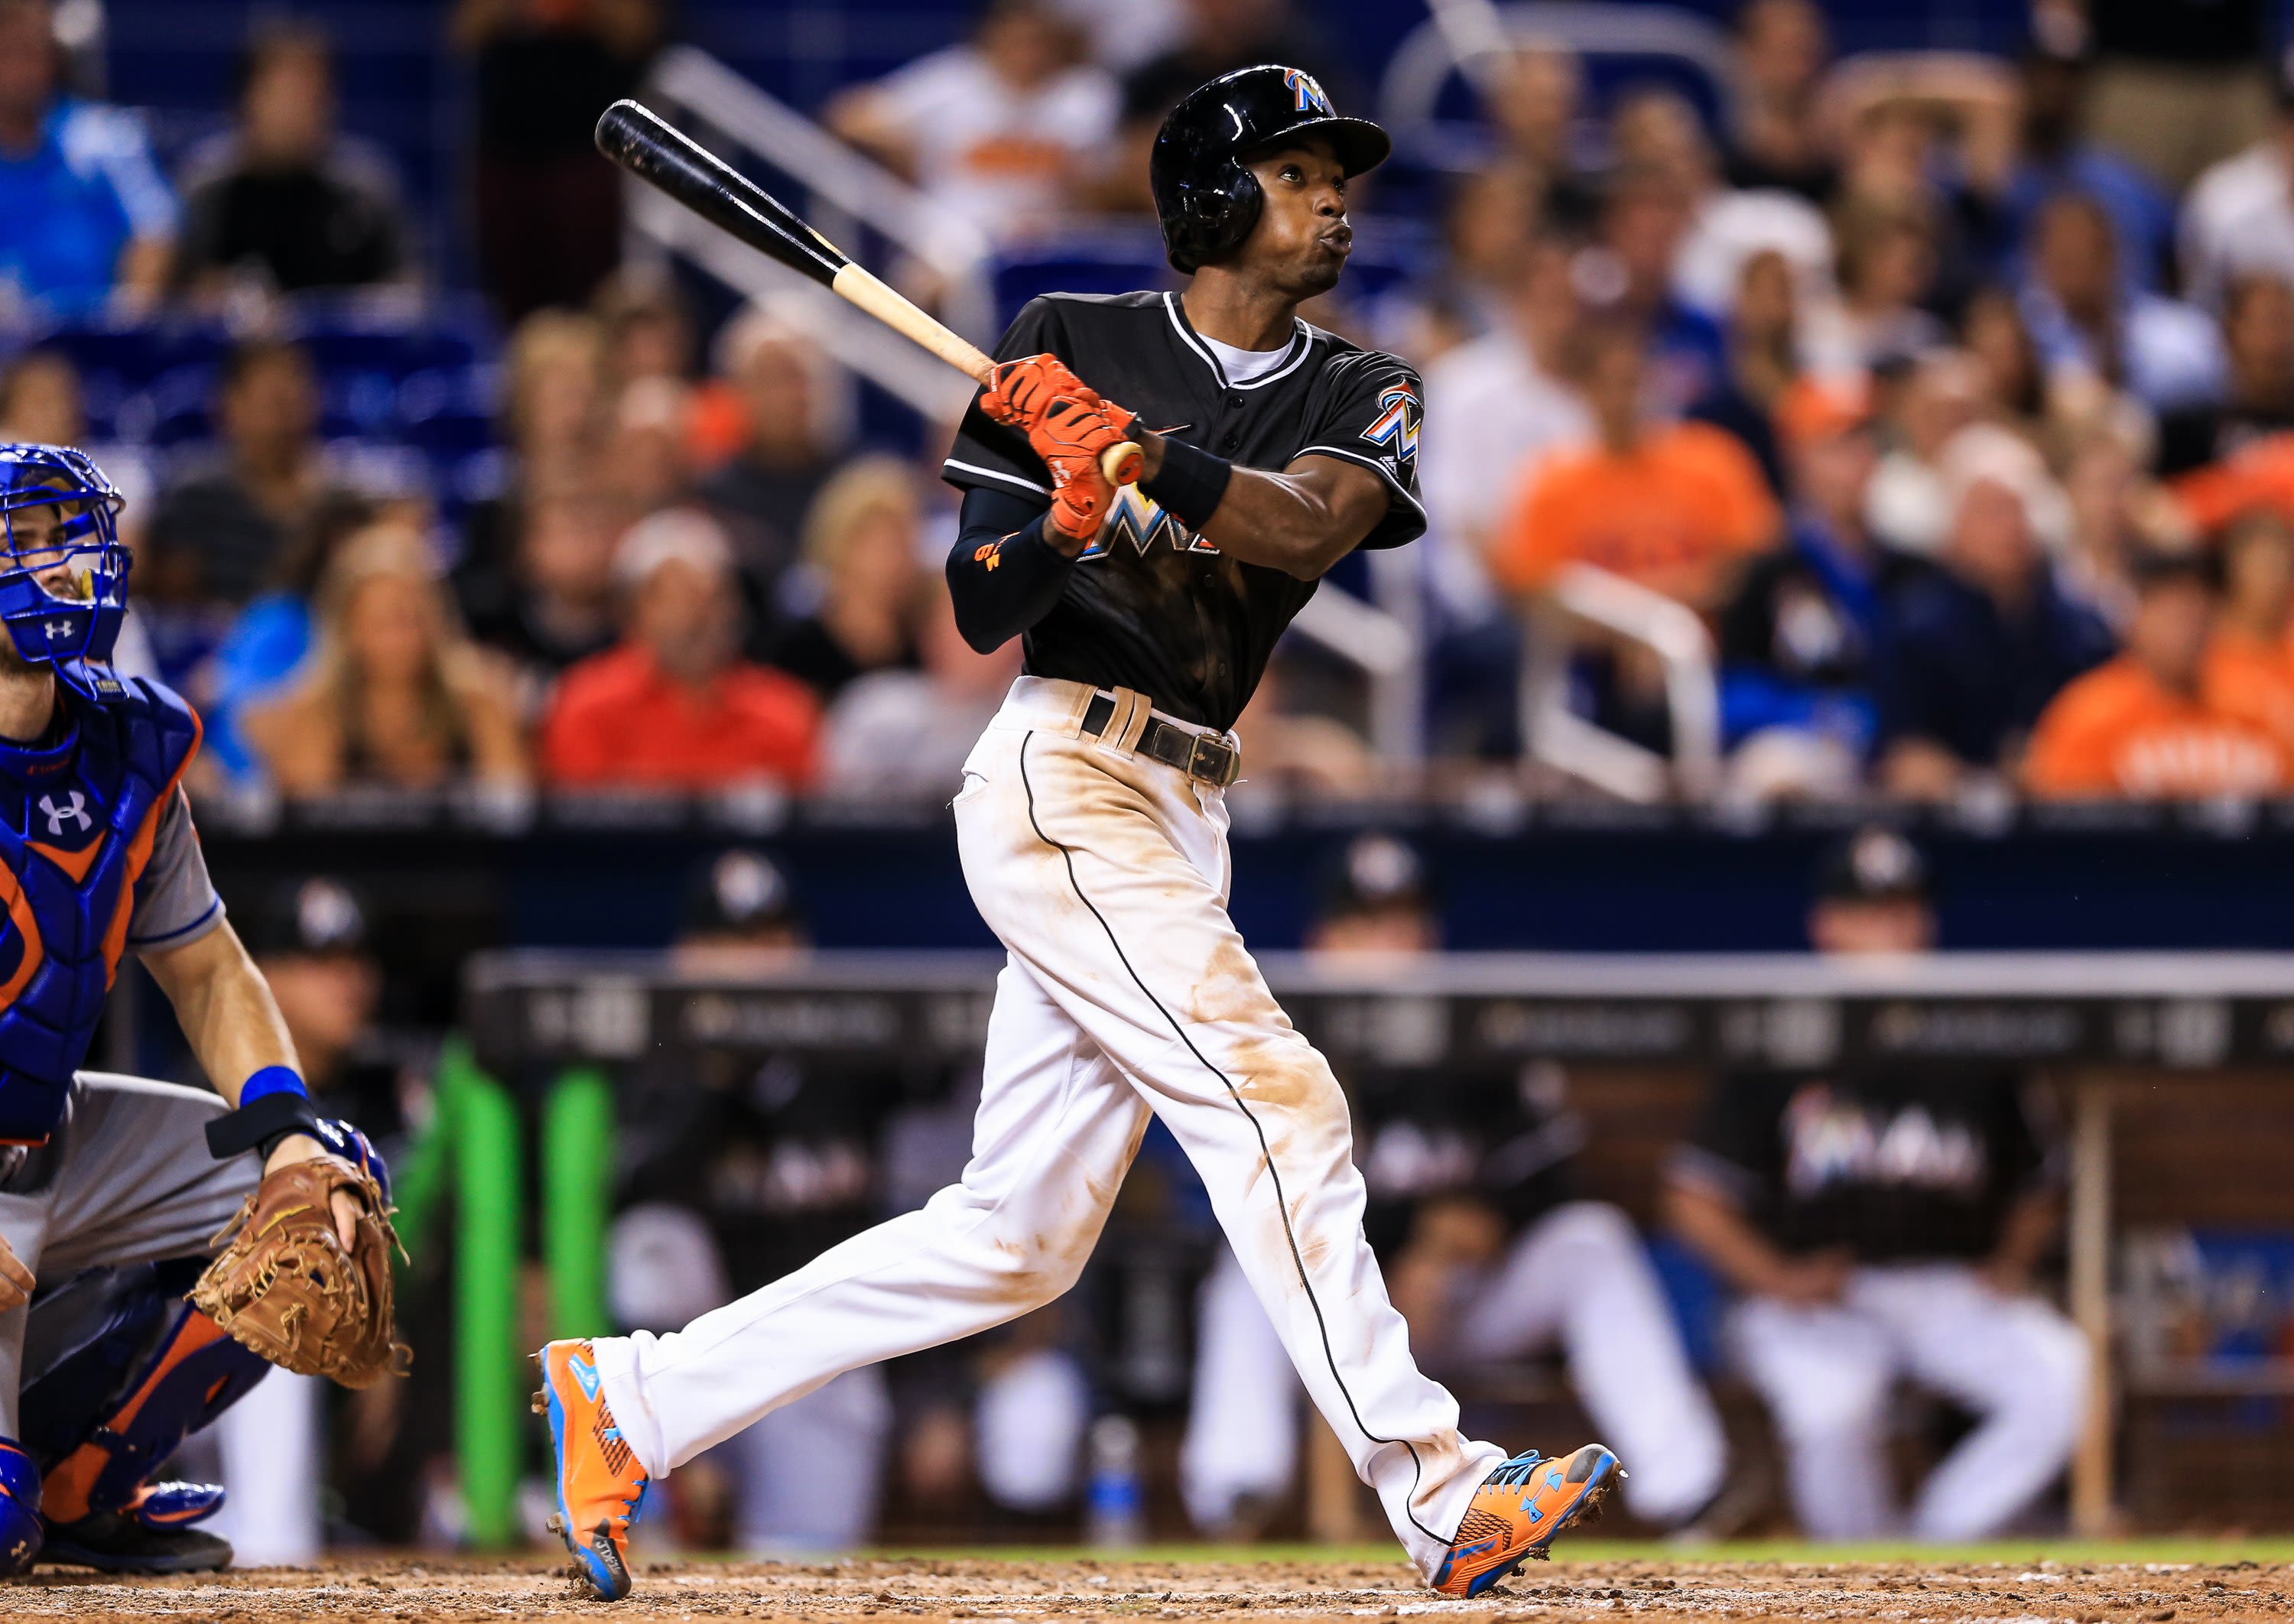 Marlins homer off opening at-bat in first game after José Fernández's death, Miami Marlins